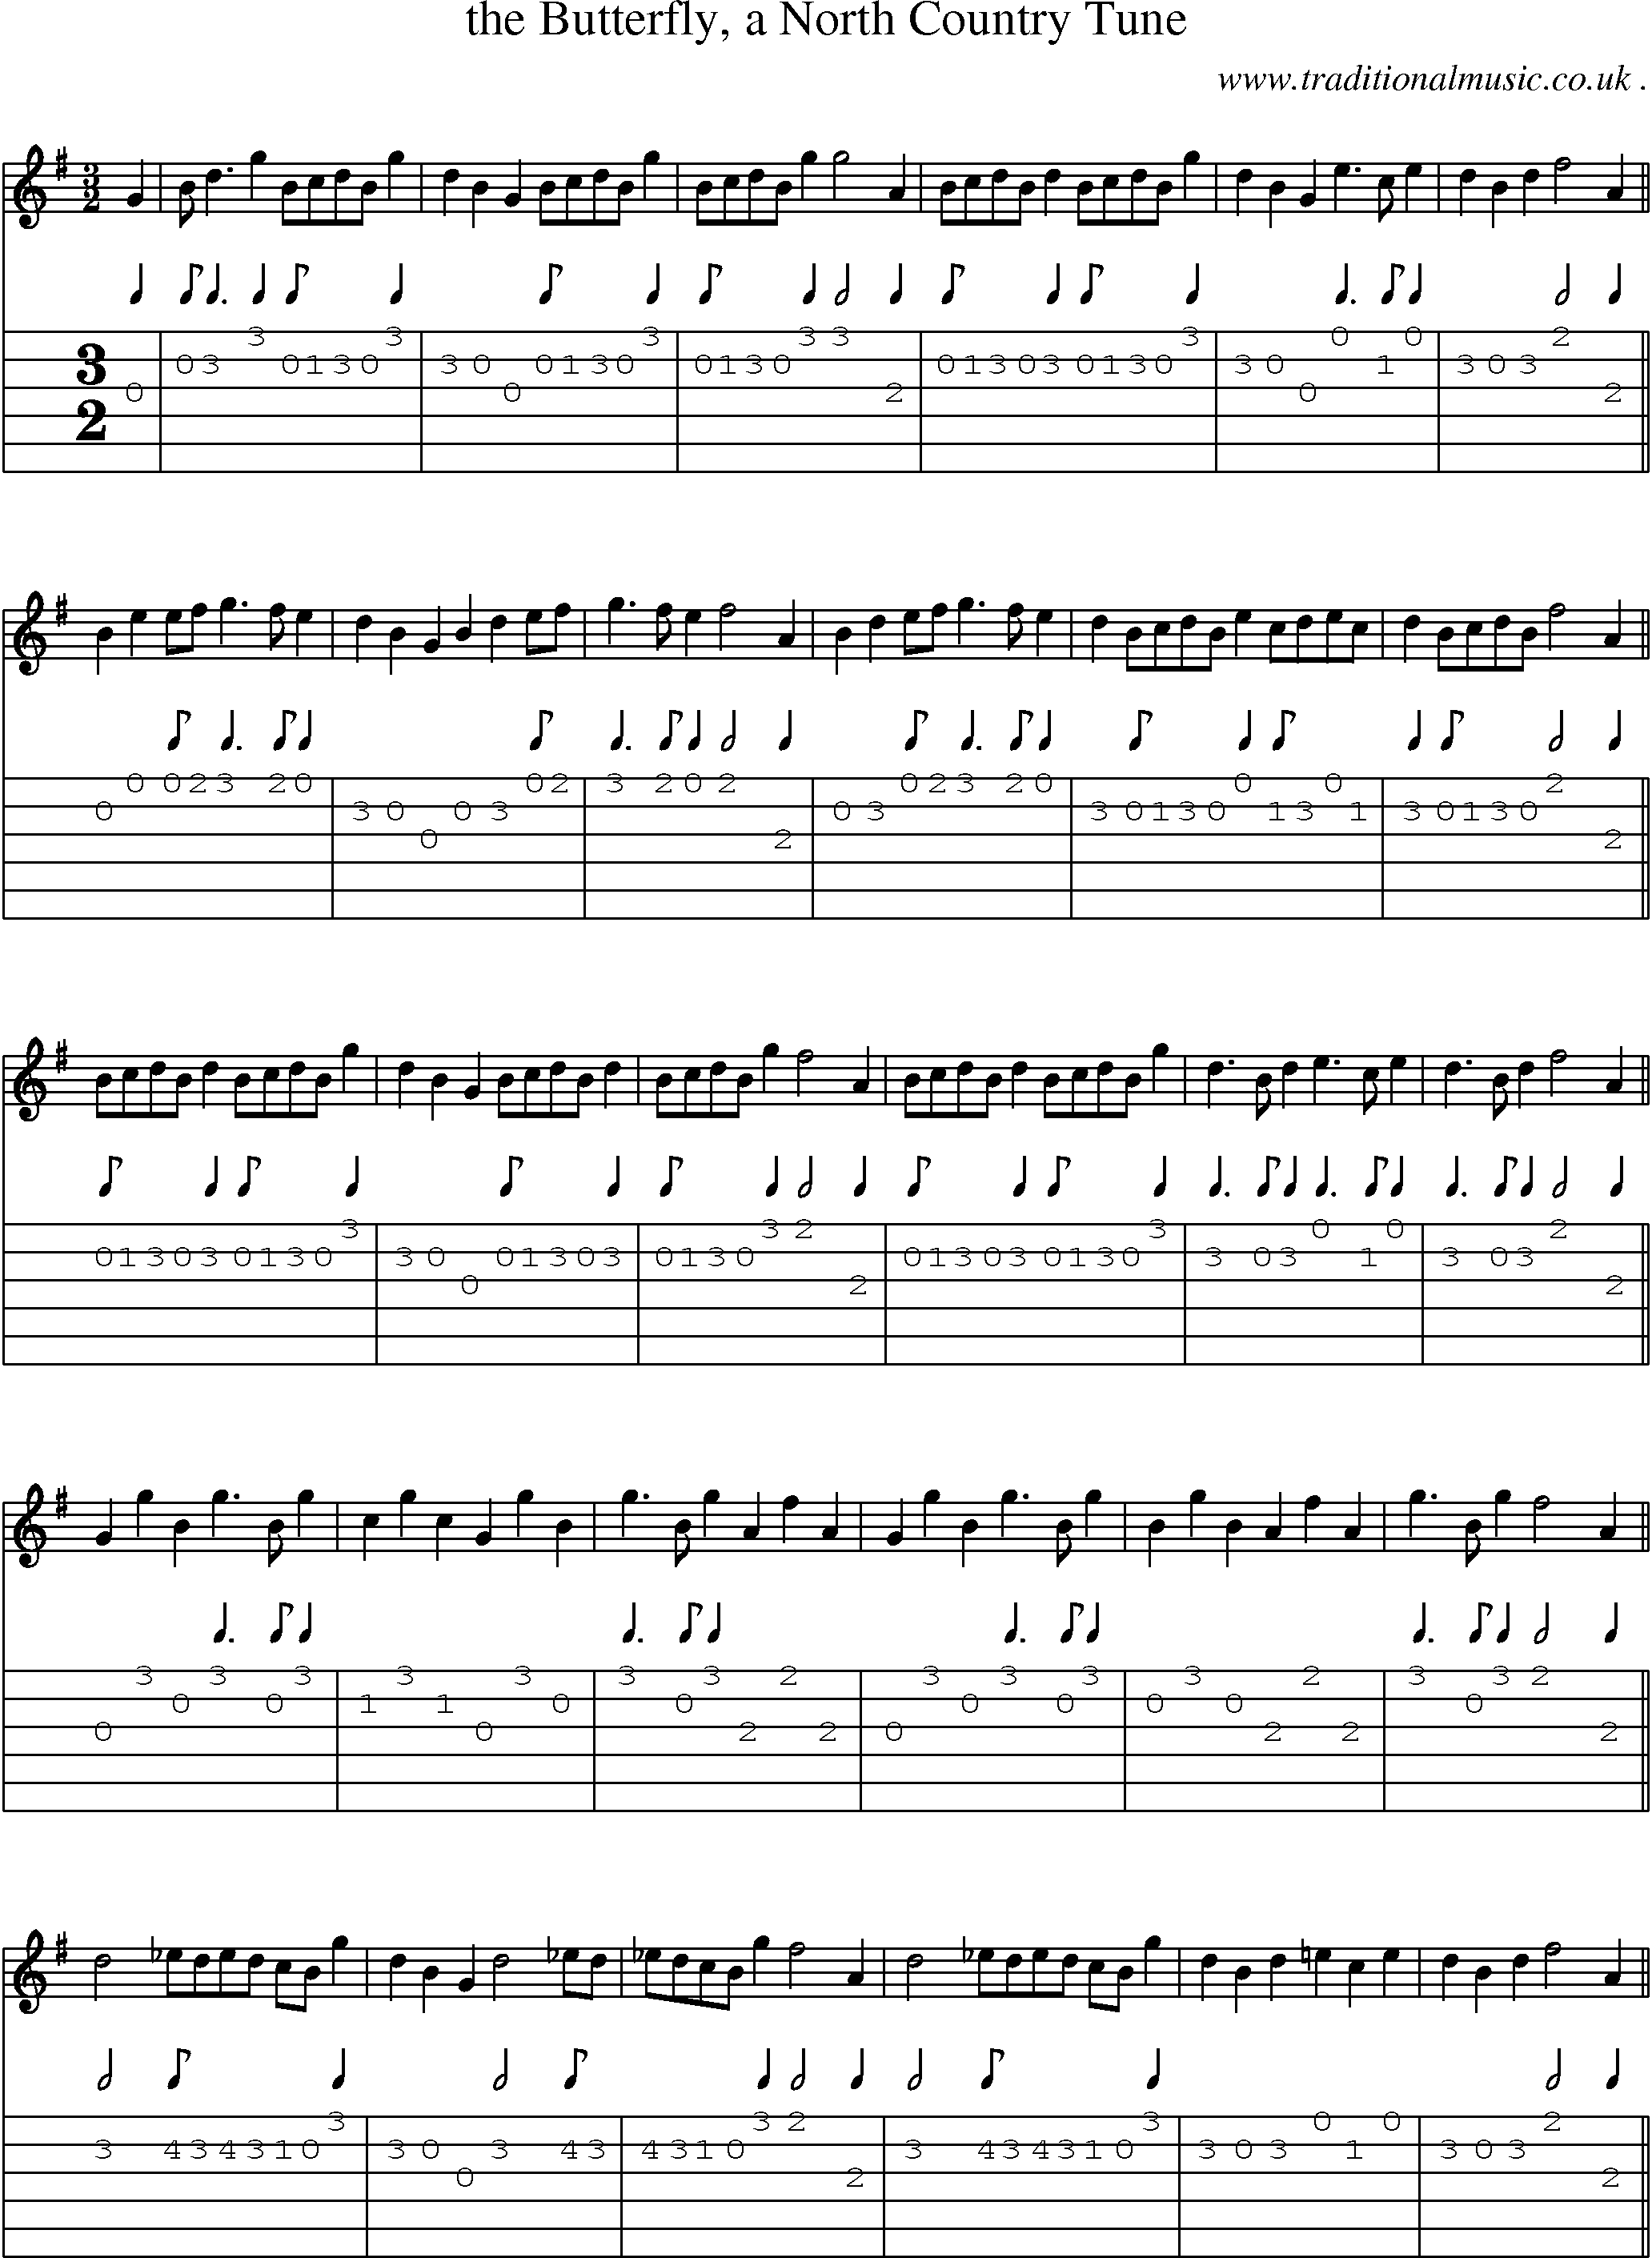 Sheet-Music and Guitar Tabs for The Butterfly A North Country Tune